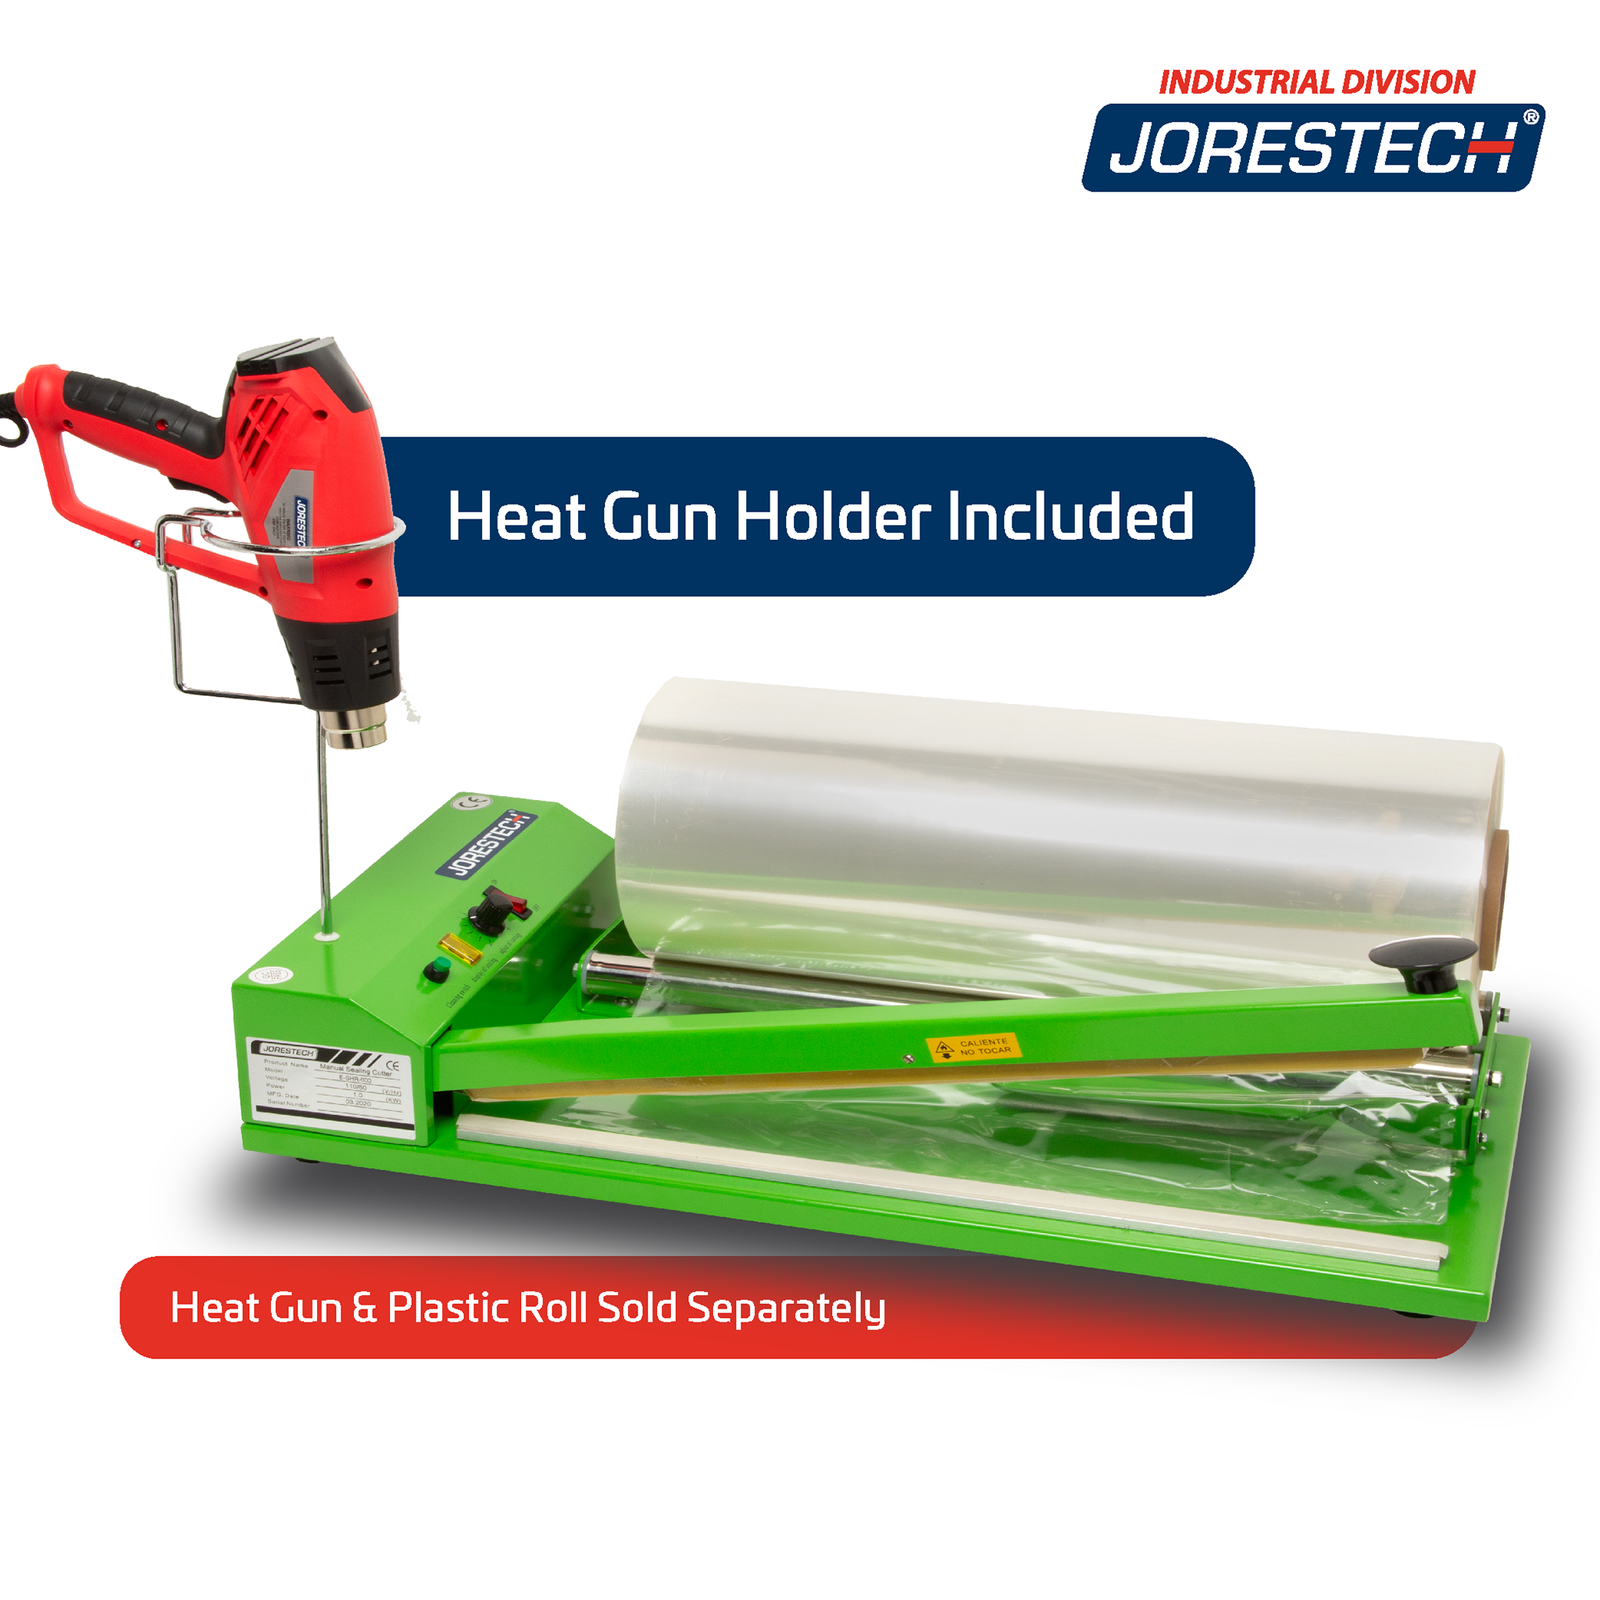 Green metal shrink packaging machine with a roll of shrink film resting on the machine's film holder and a heat gun placed on the gun holder. A blue text reads: 